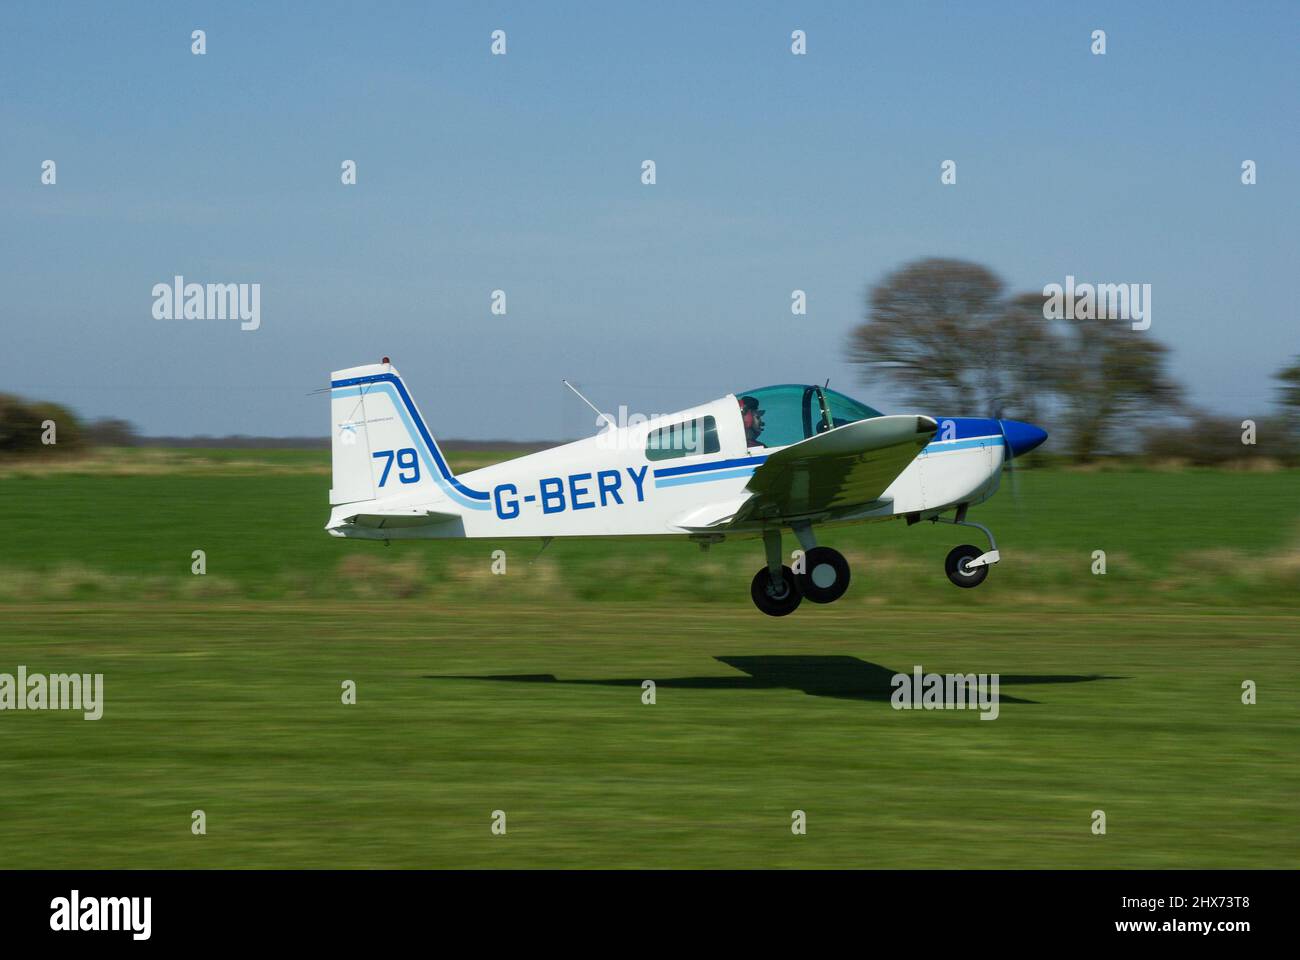 Grumman AA-1B G-BERY 'Race 79' taking off from Great Oakley airstrip in Essex to compete in the Royal Aero Club Air Race. Small private plane Stock Photo